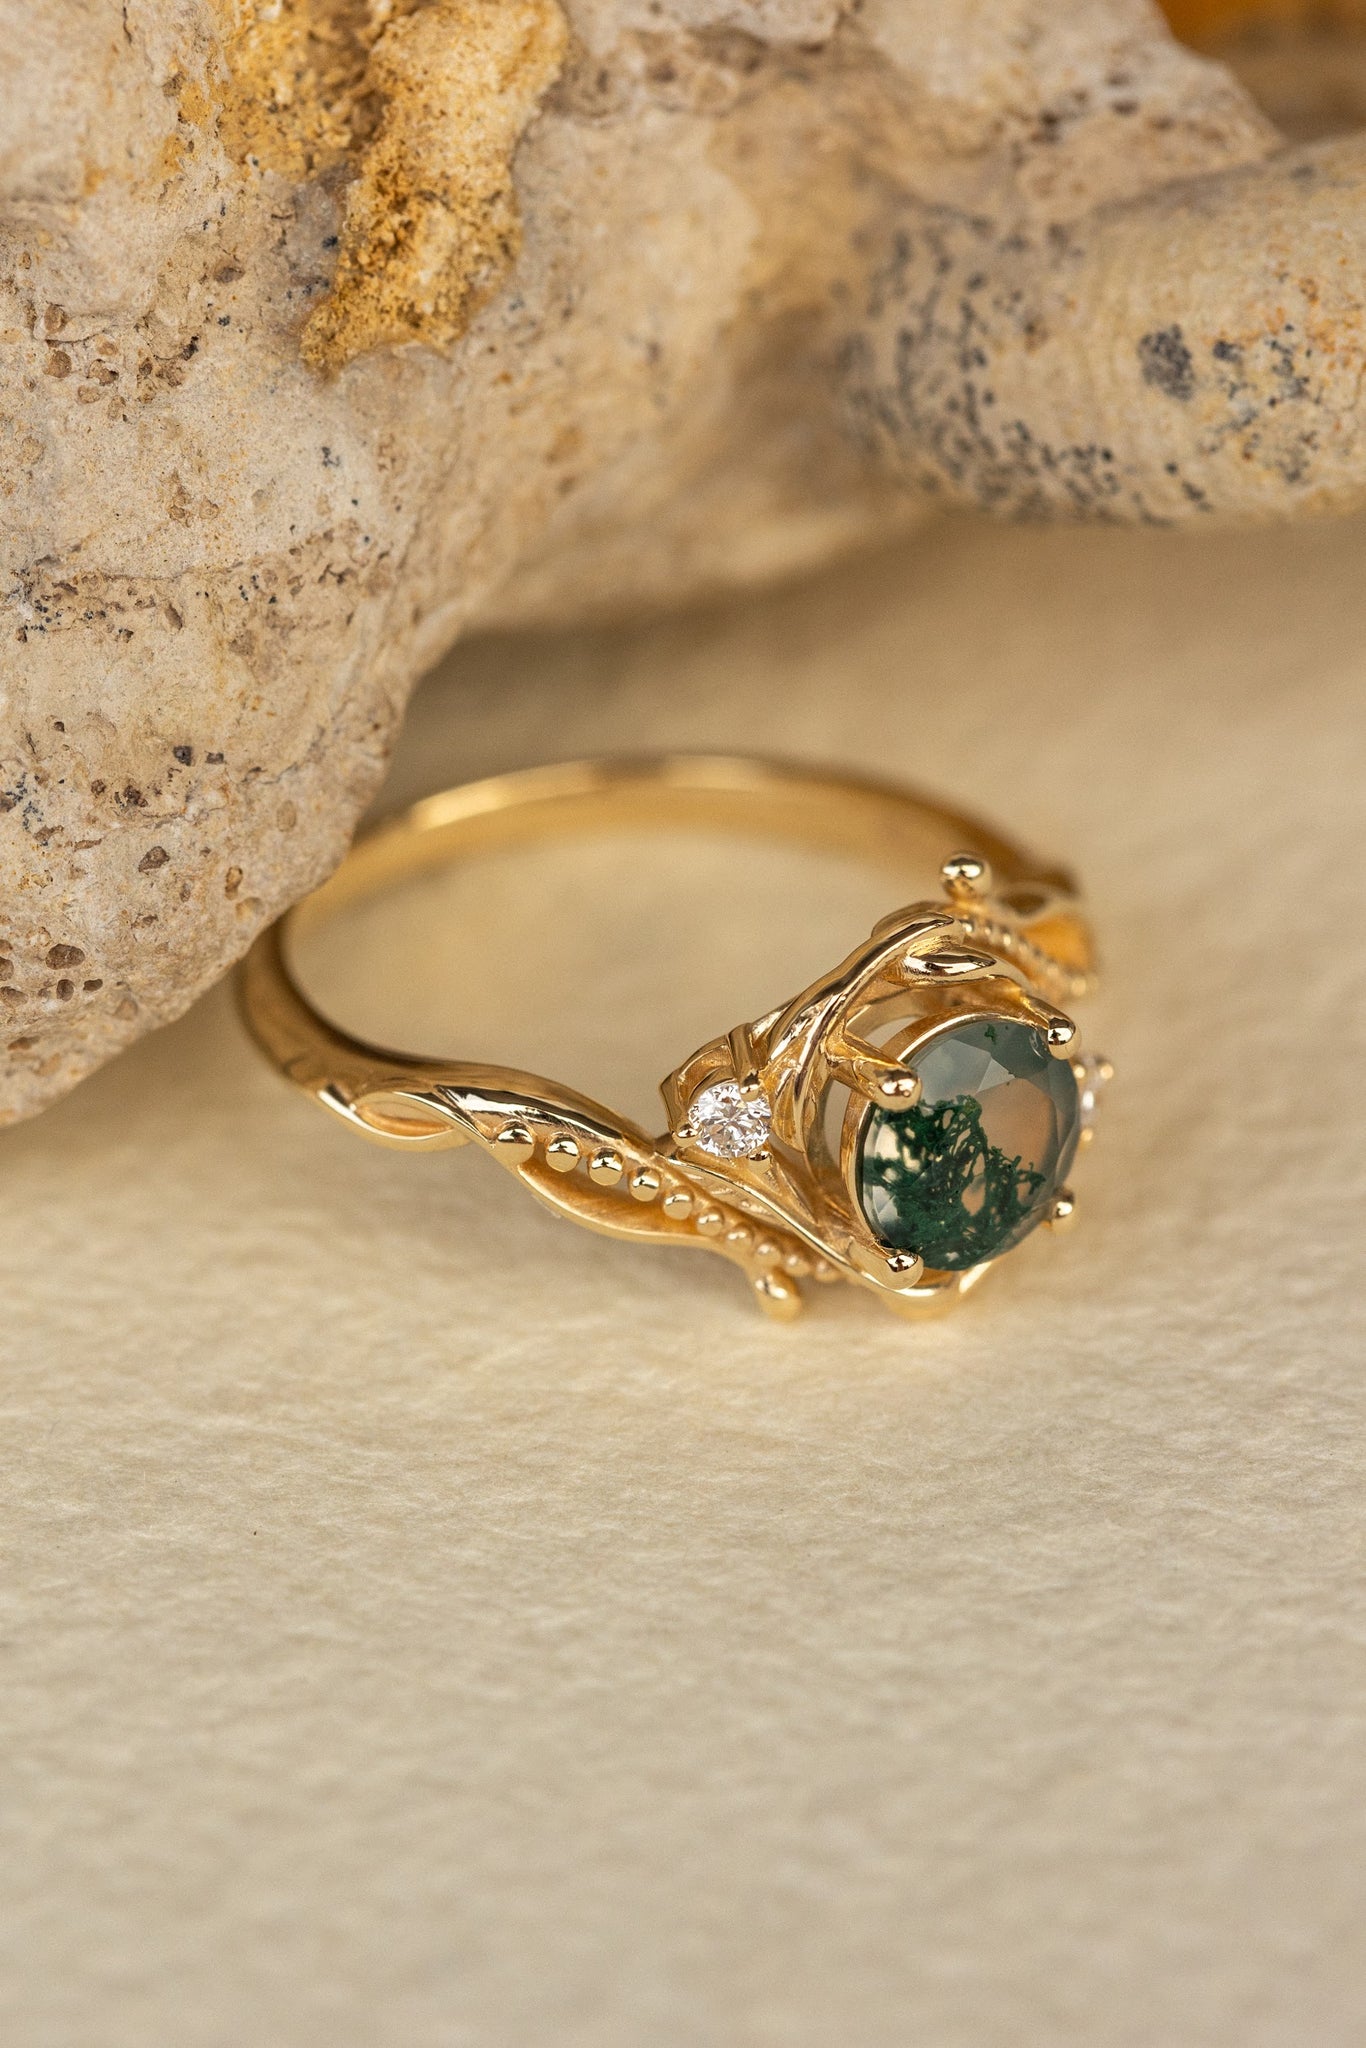 Natural moss agate yellow gold engagement ring with accent diamonds, nature themed proposal gold ring with diamonds / Undina - Eden Garden Jewelry™